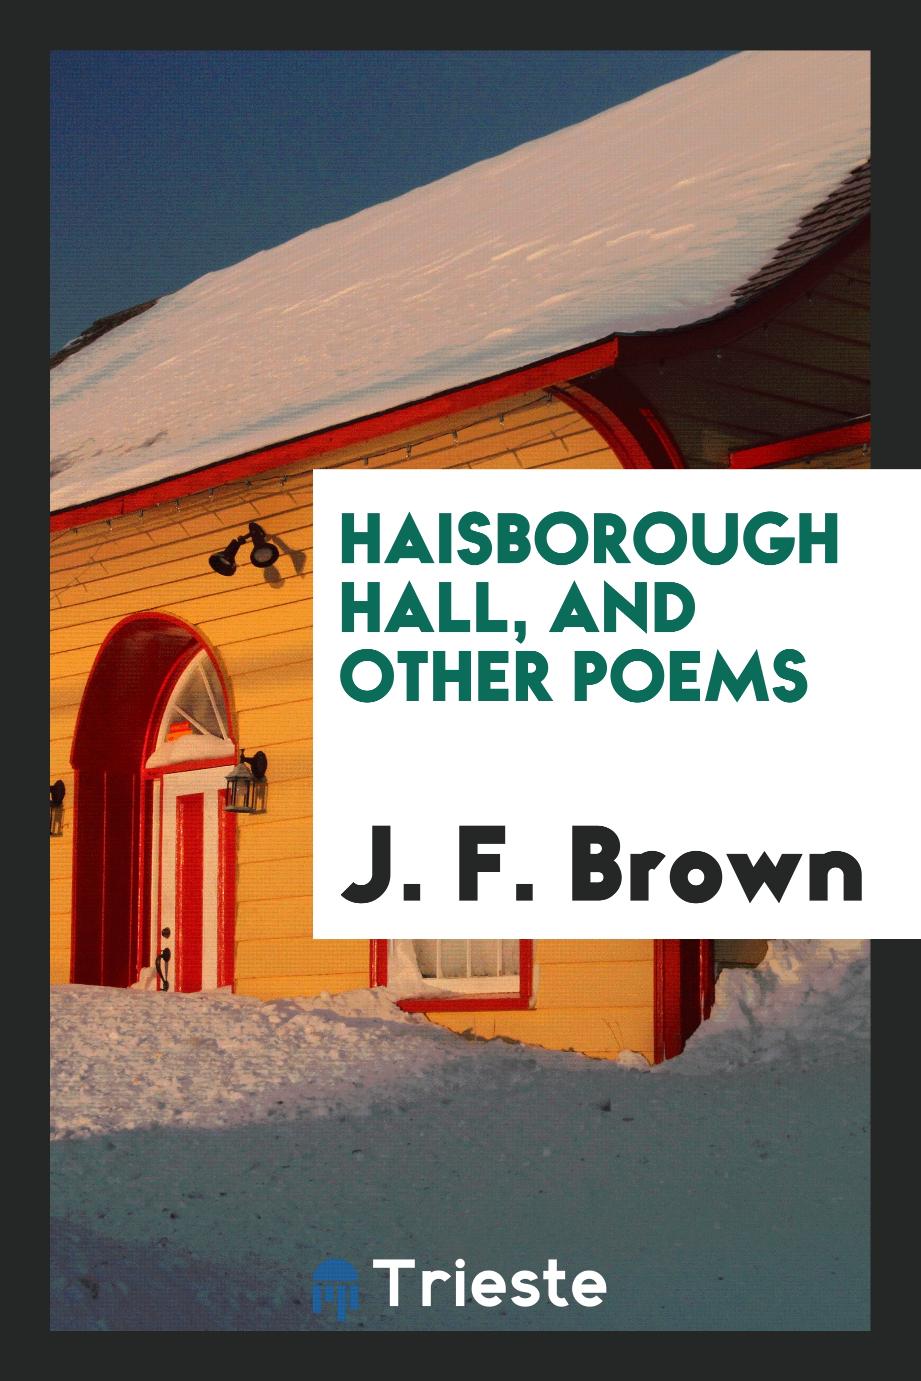 Haisborough Hall, and Other Poems